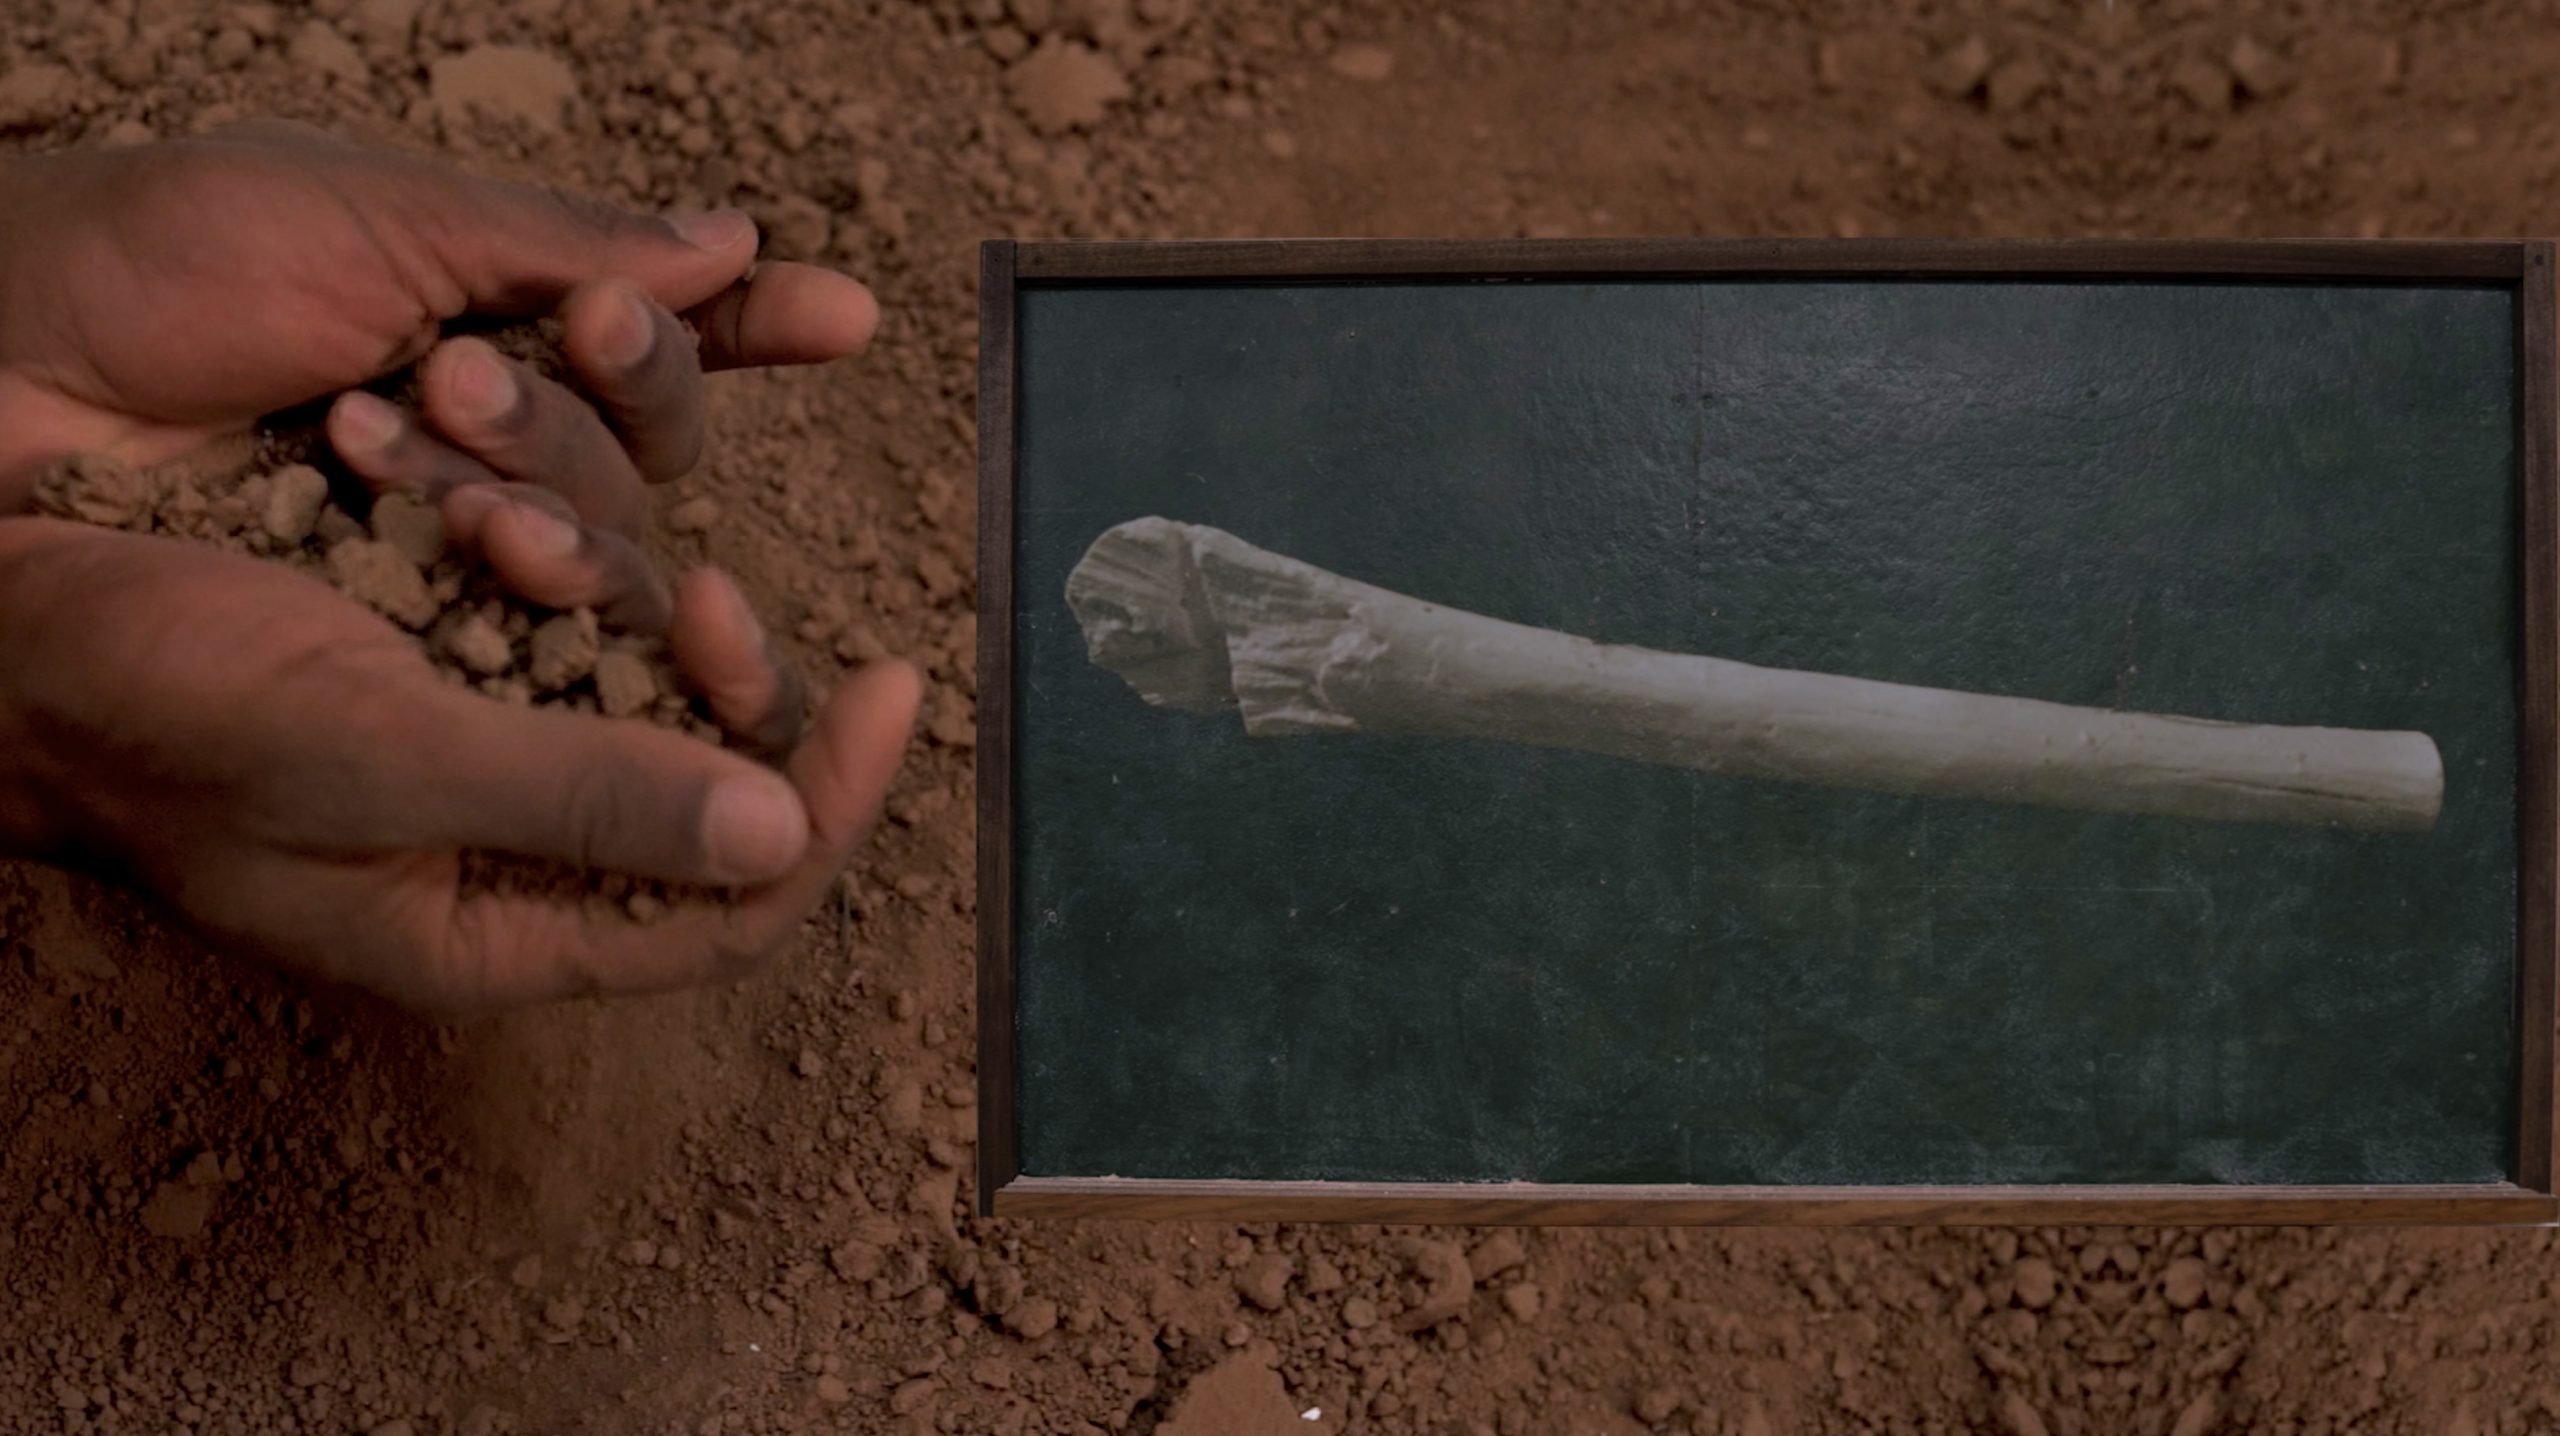 A hand holding dirt next to a picture of a bone.